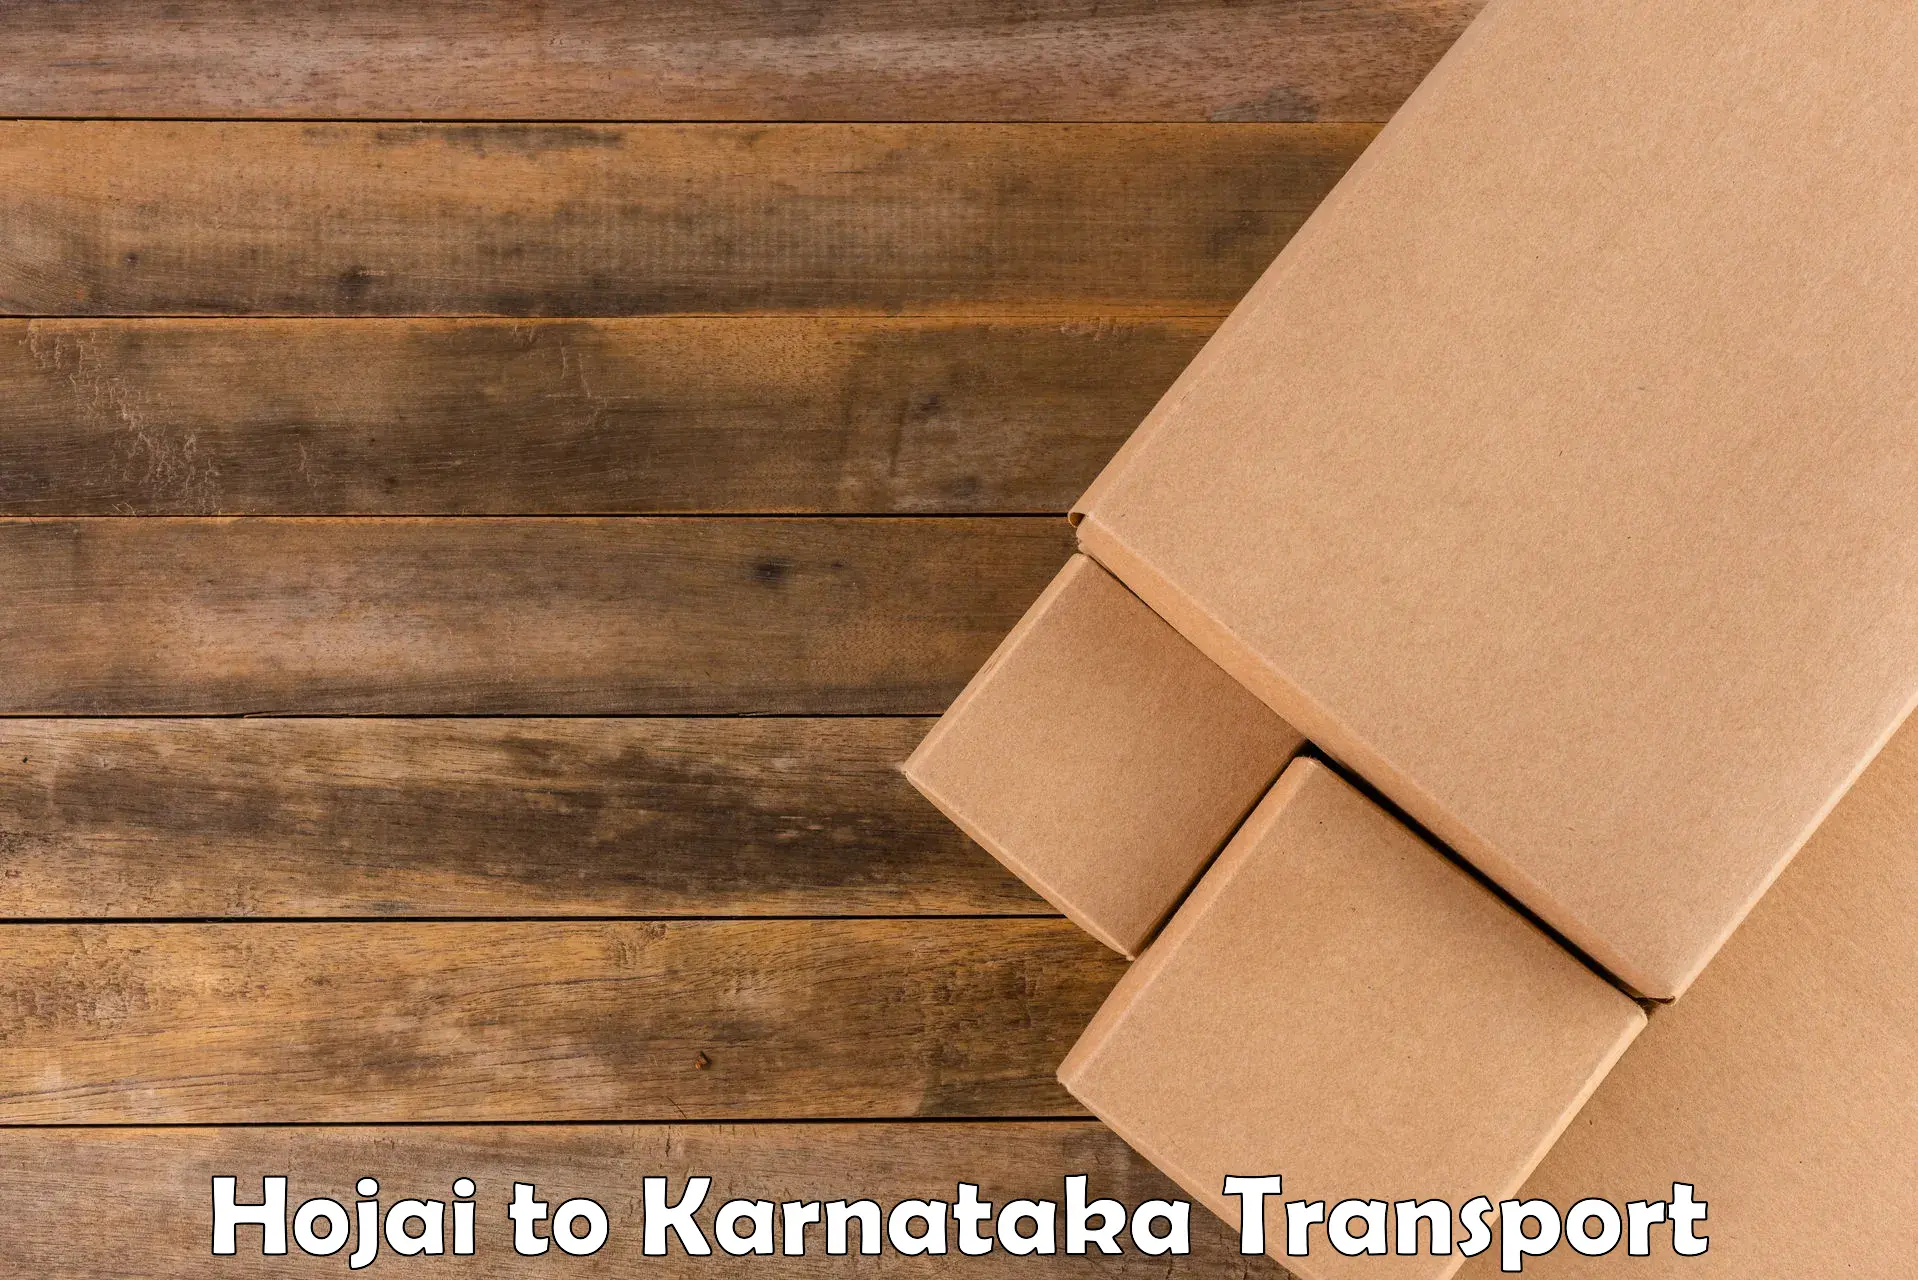 Two wheeler transport services Hojai to Manipal